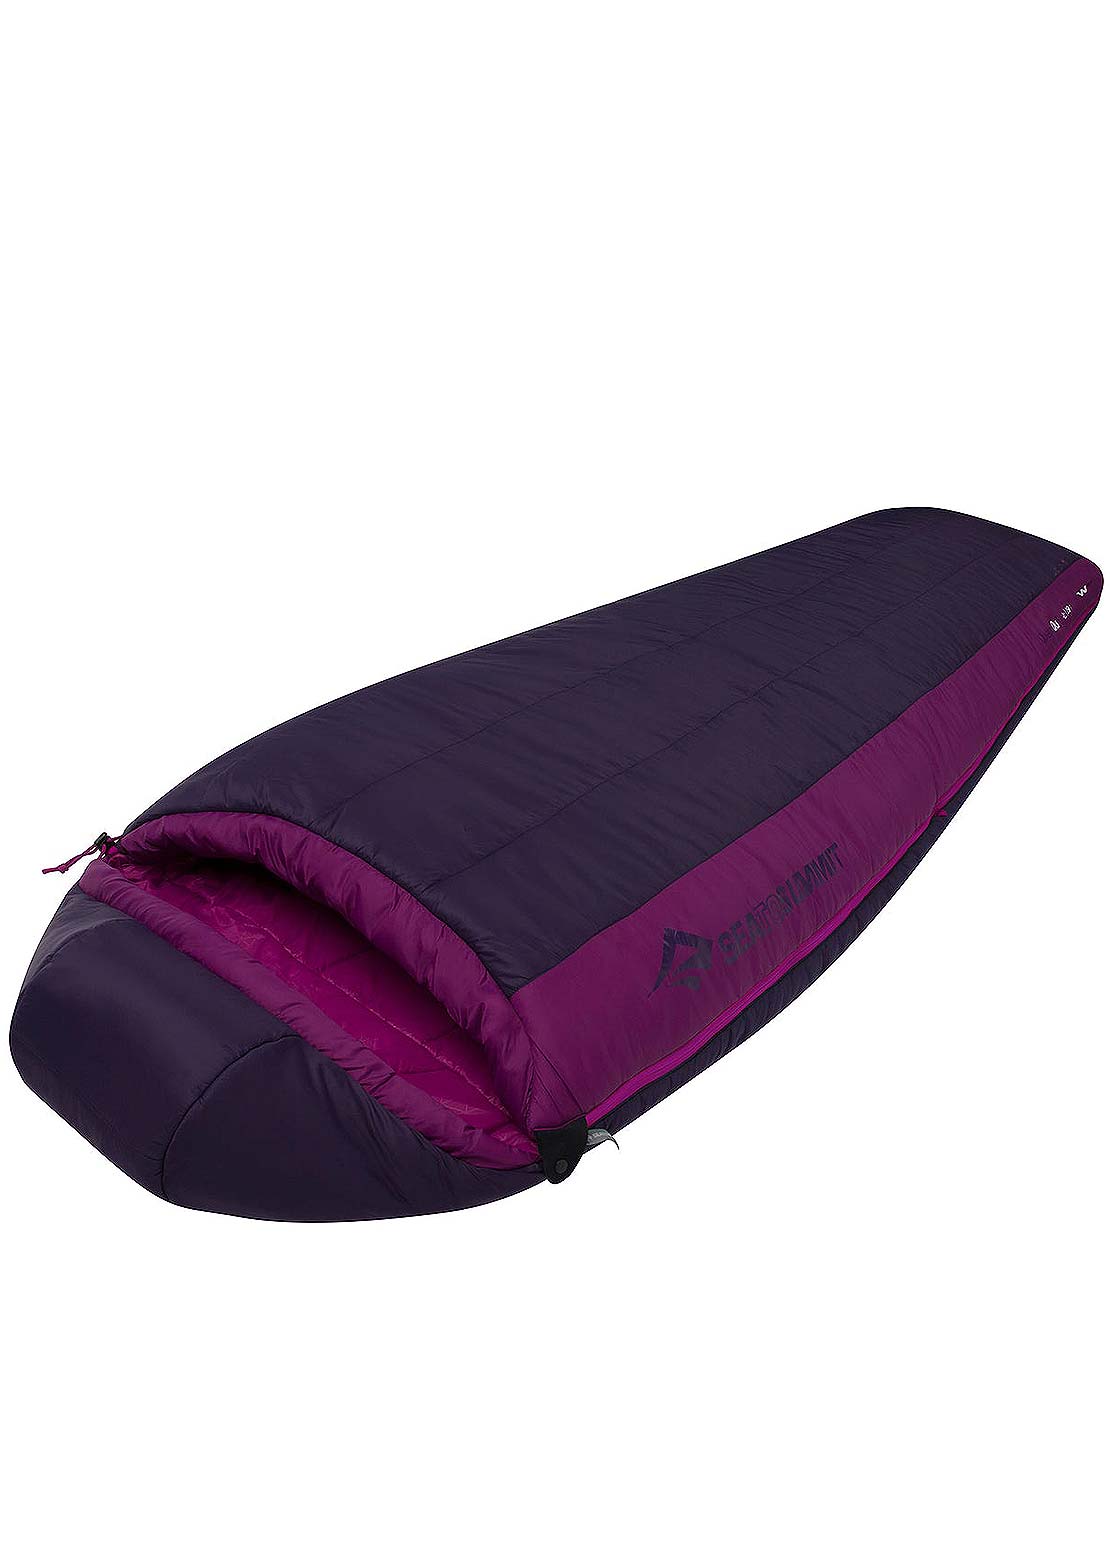 Sea To Summit Quest Synthetic Sleeping Bag